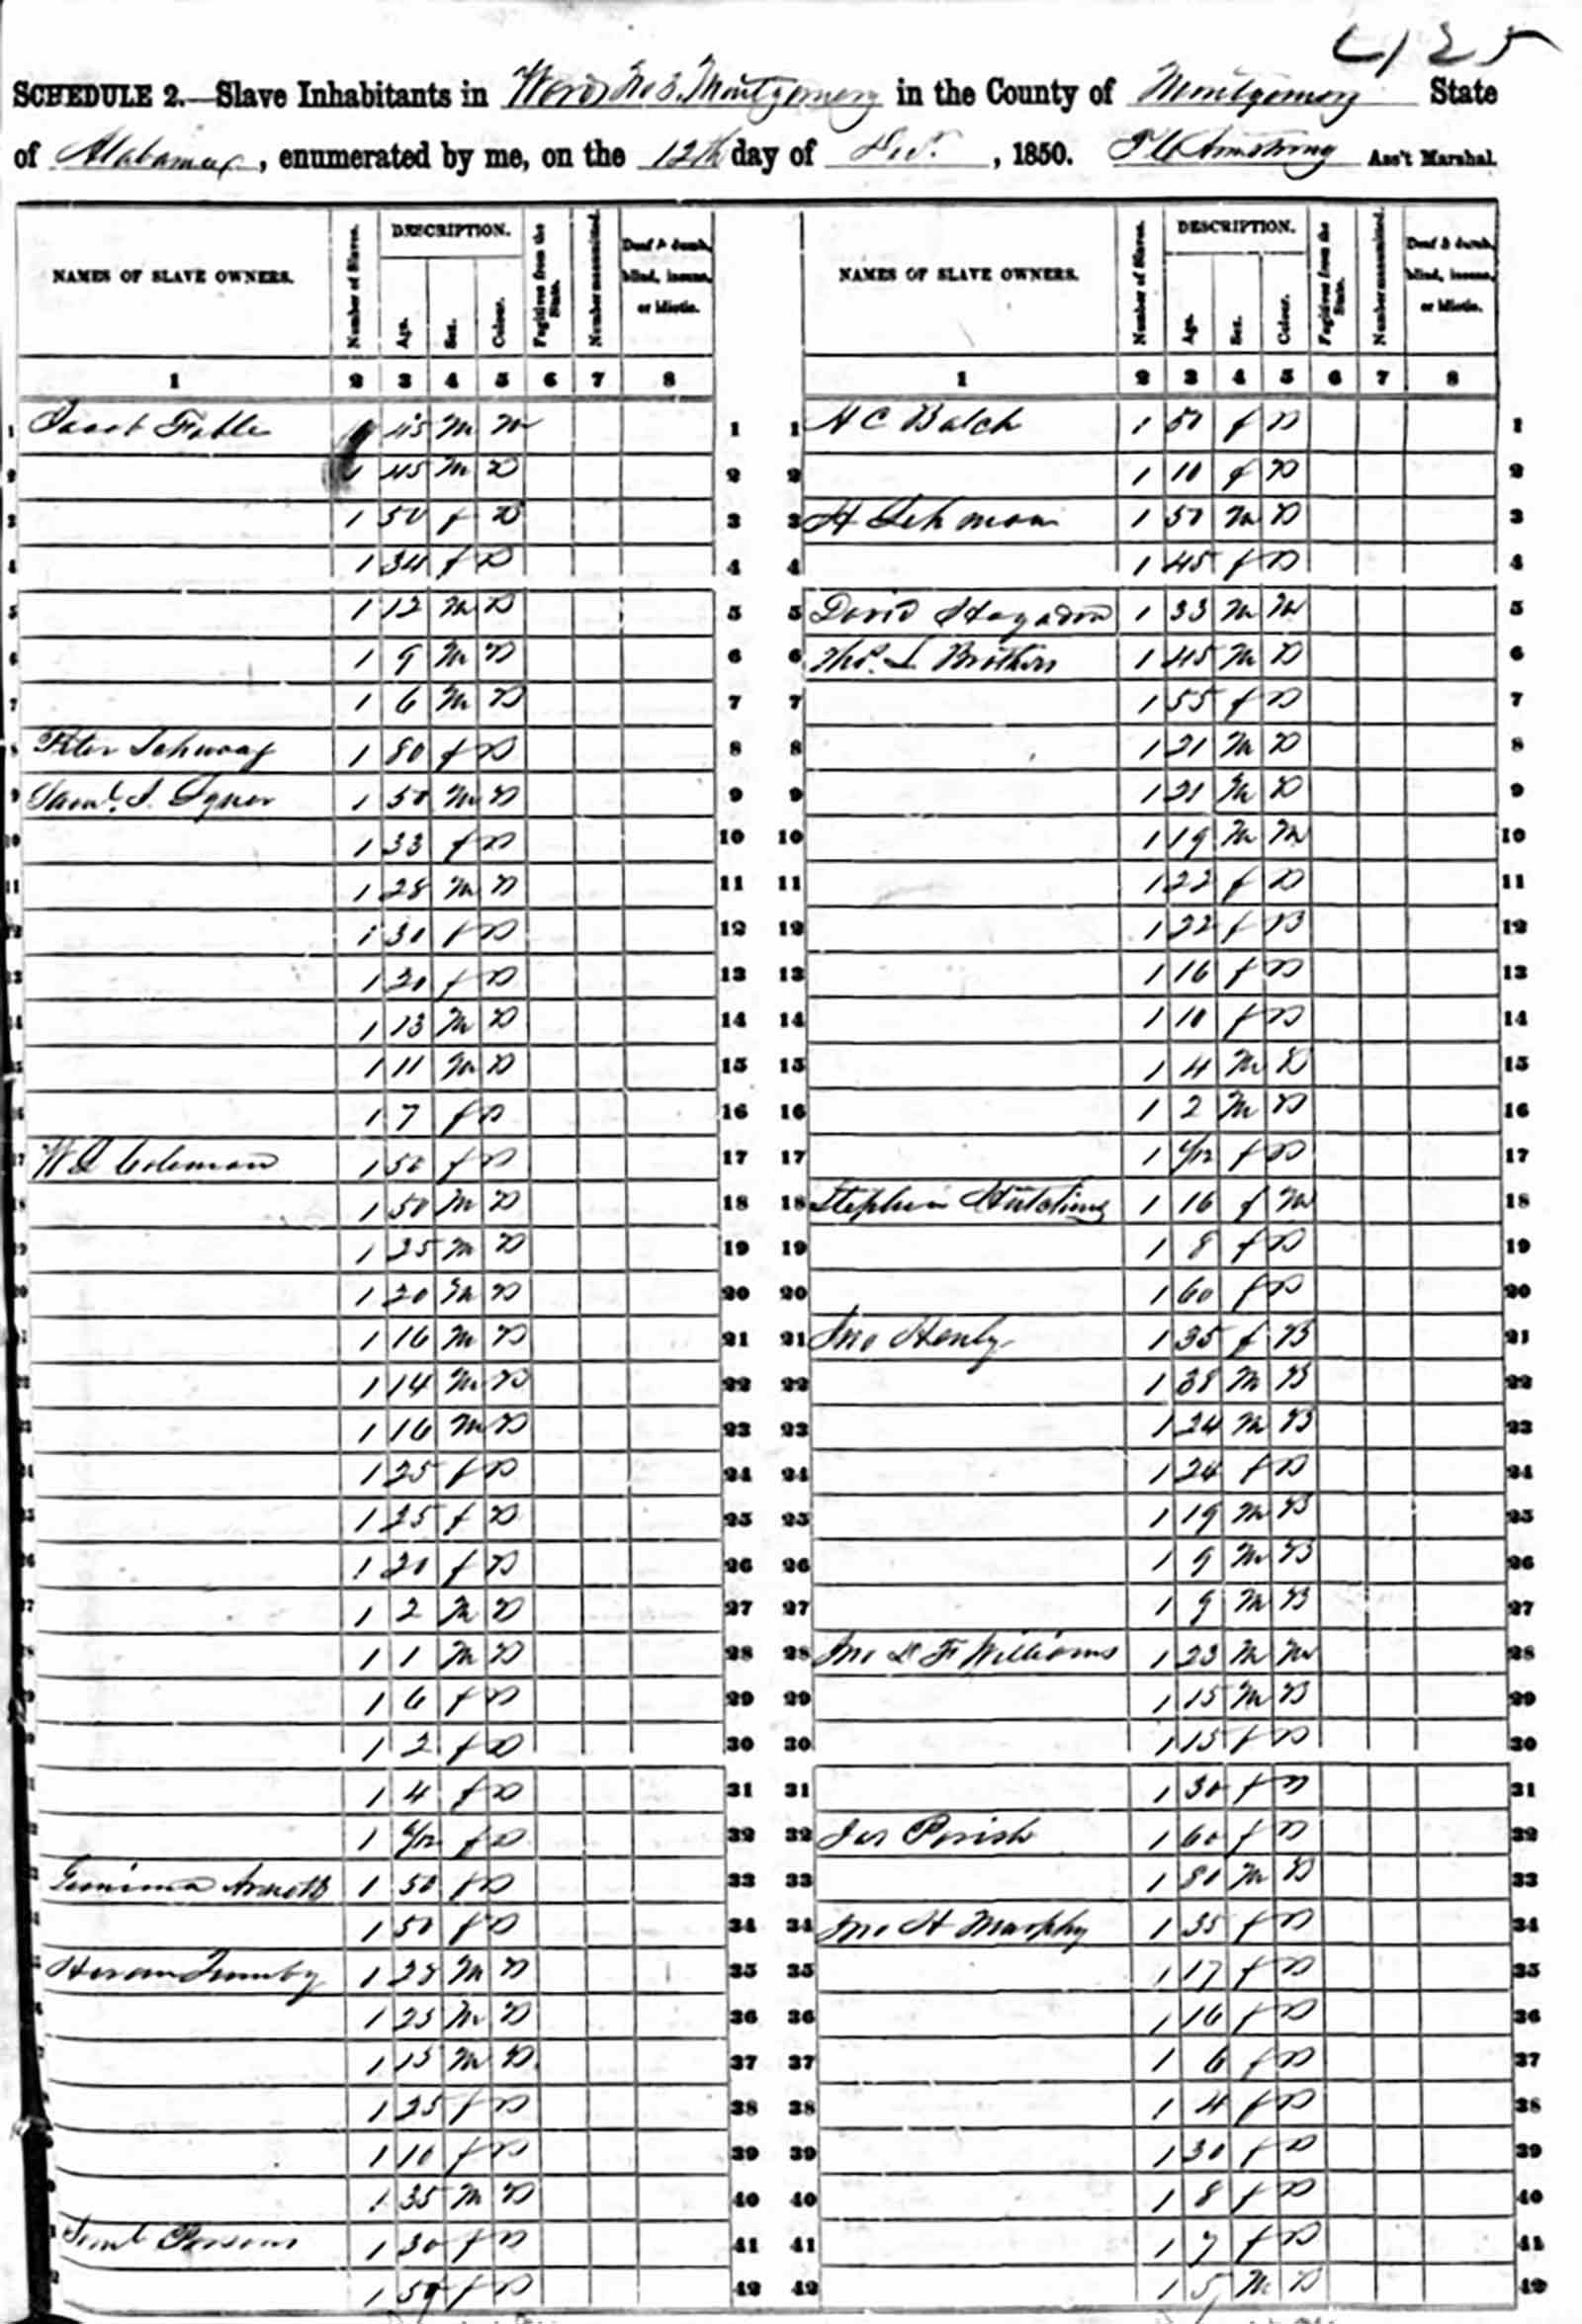 Page from the 1850 Montgomery County slave schedule identifying Henry (Hayum) Lehman as the owner of two slaves